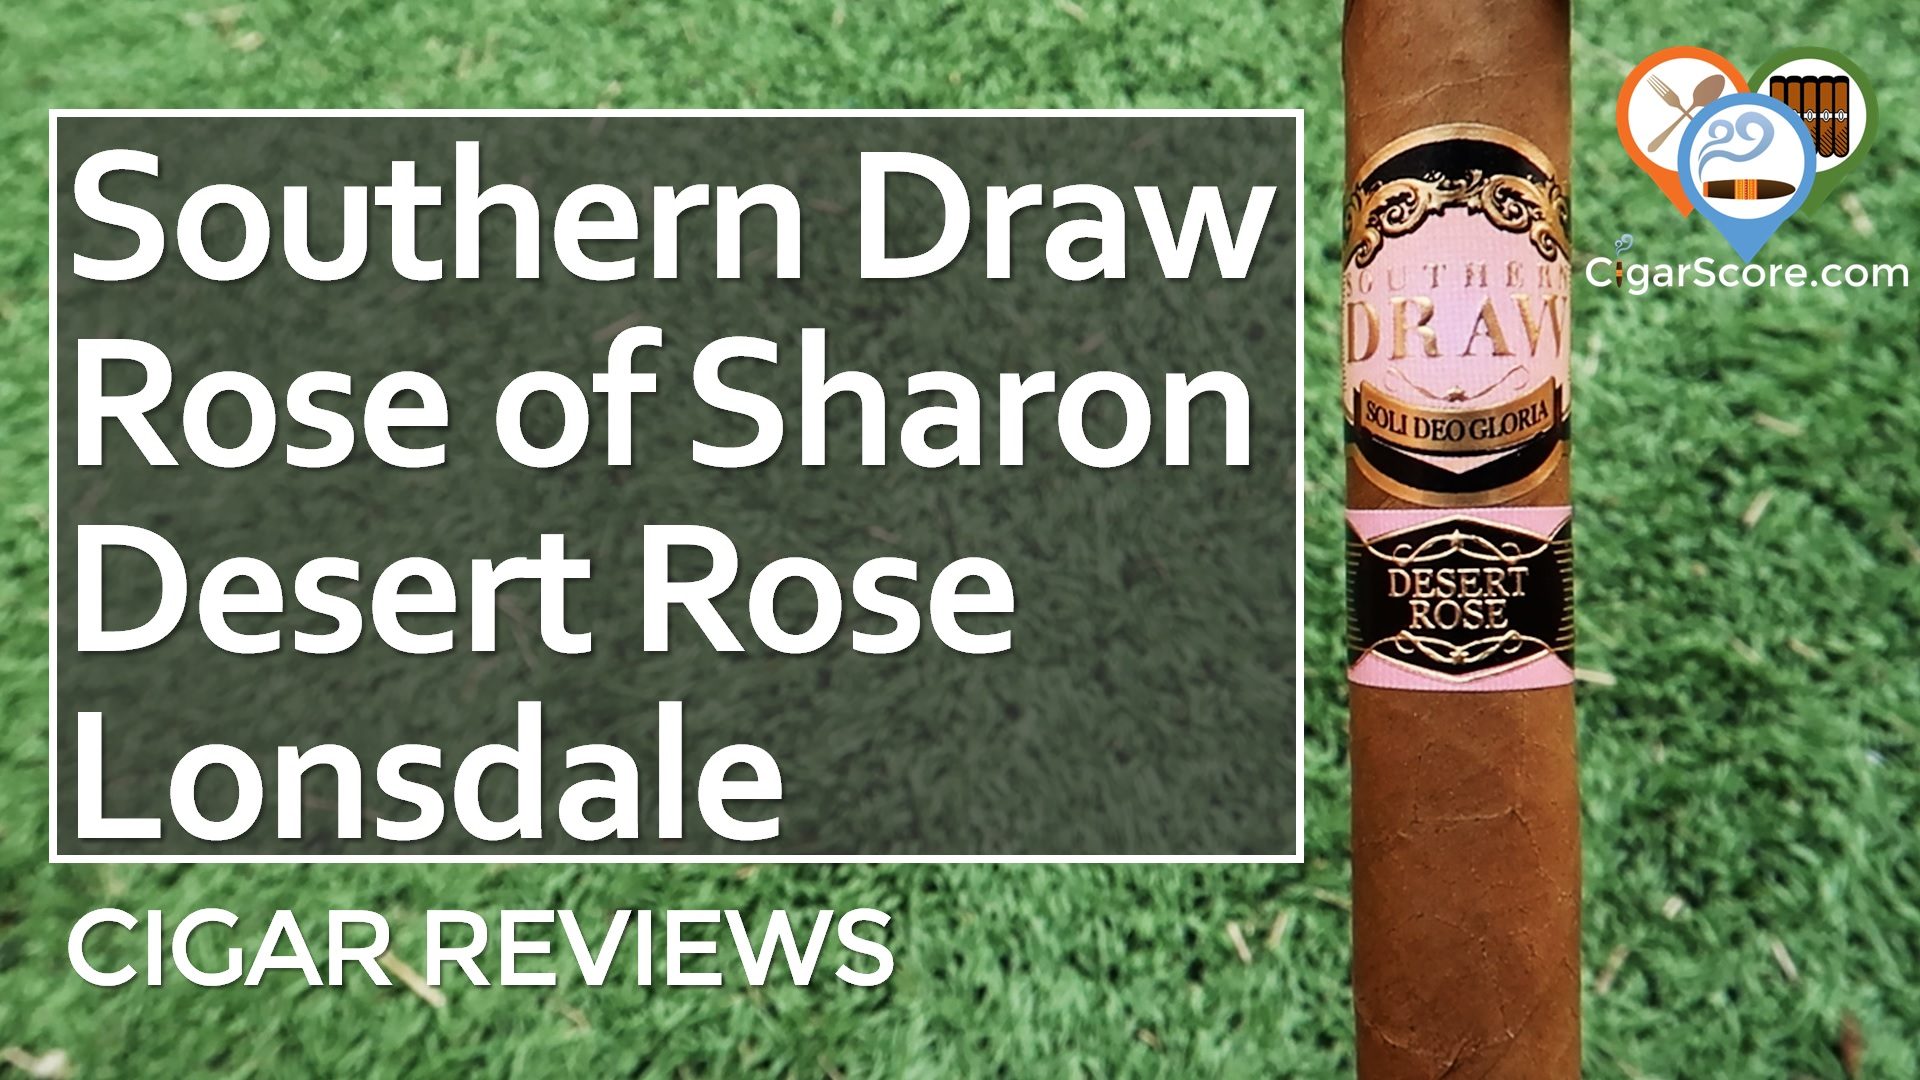 Cigar Review: Southern Draw Rose of Sharon Desert Rose Lonsdale